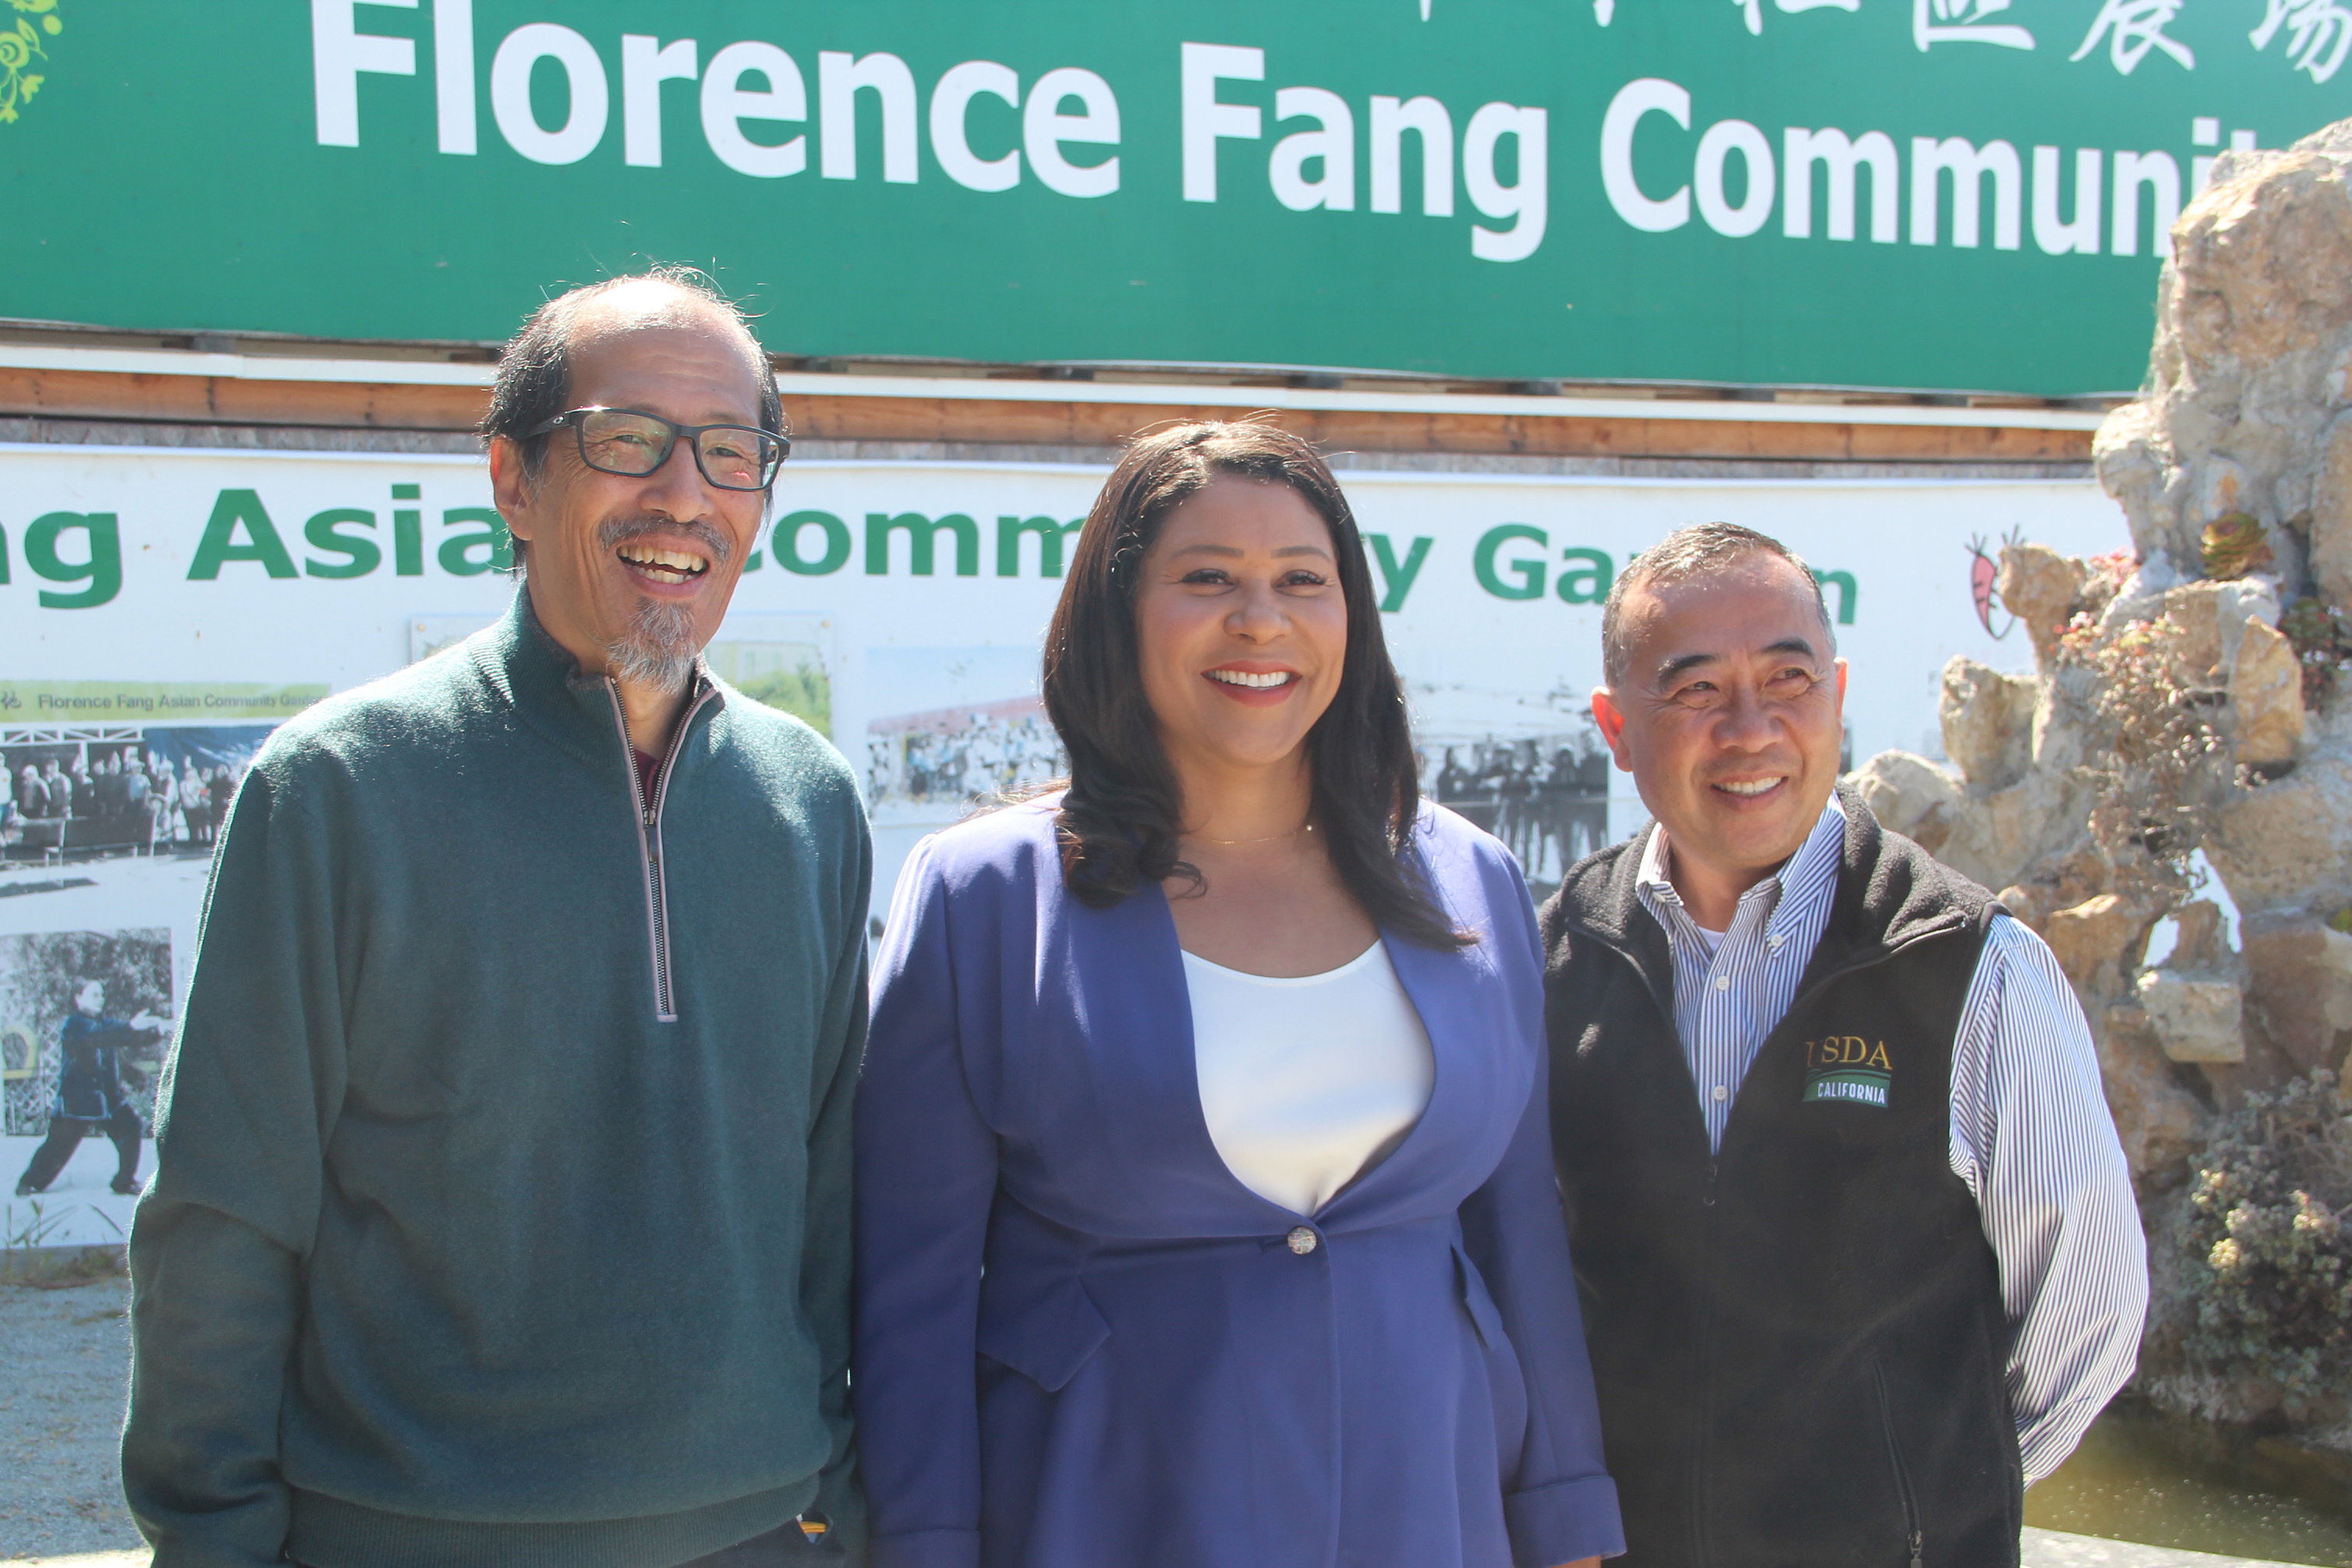 Three people are smiling in front of a sign for the Florence Fang Community Garden.